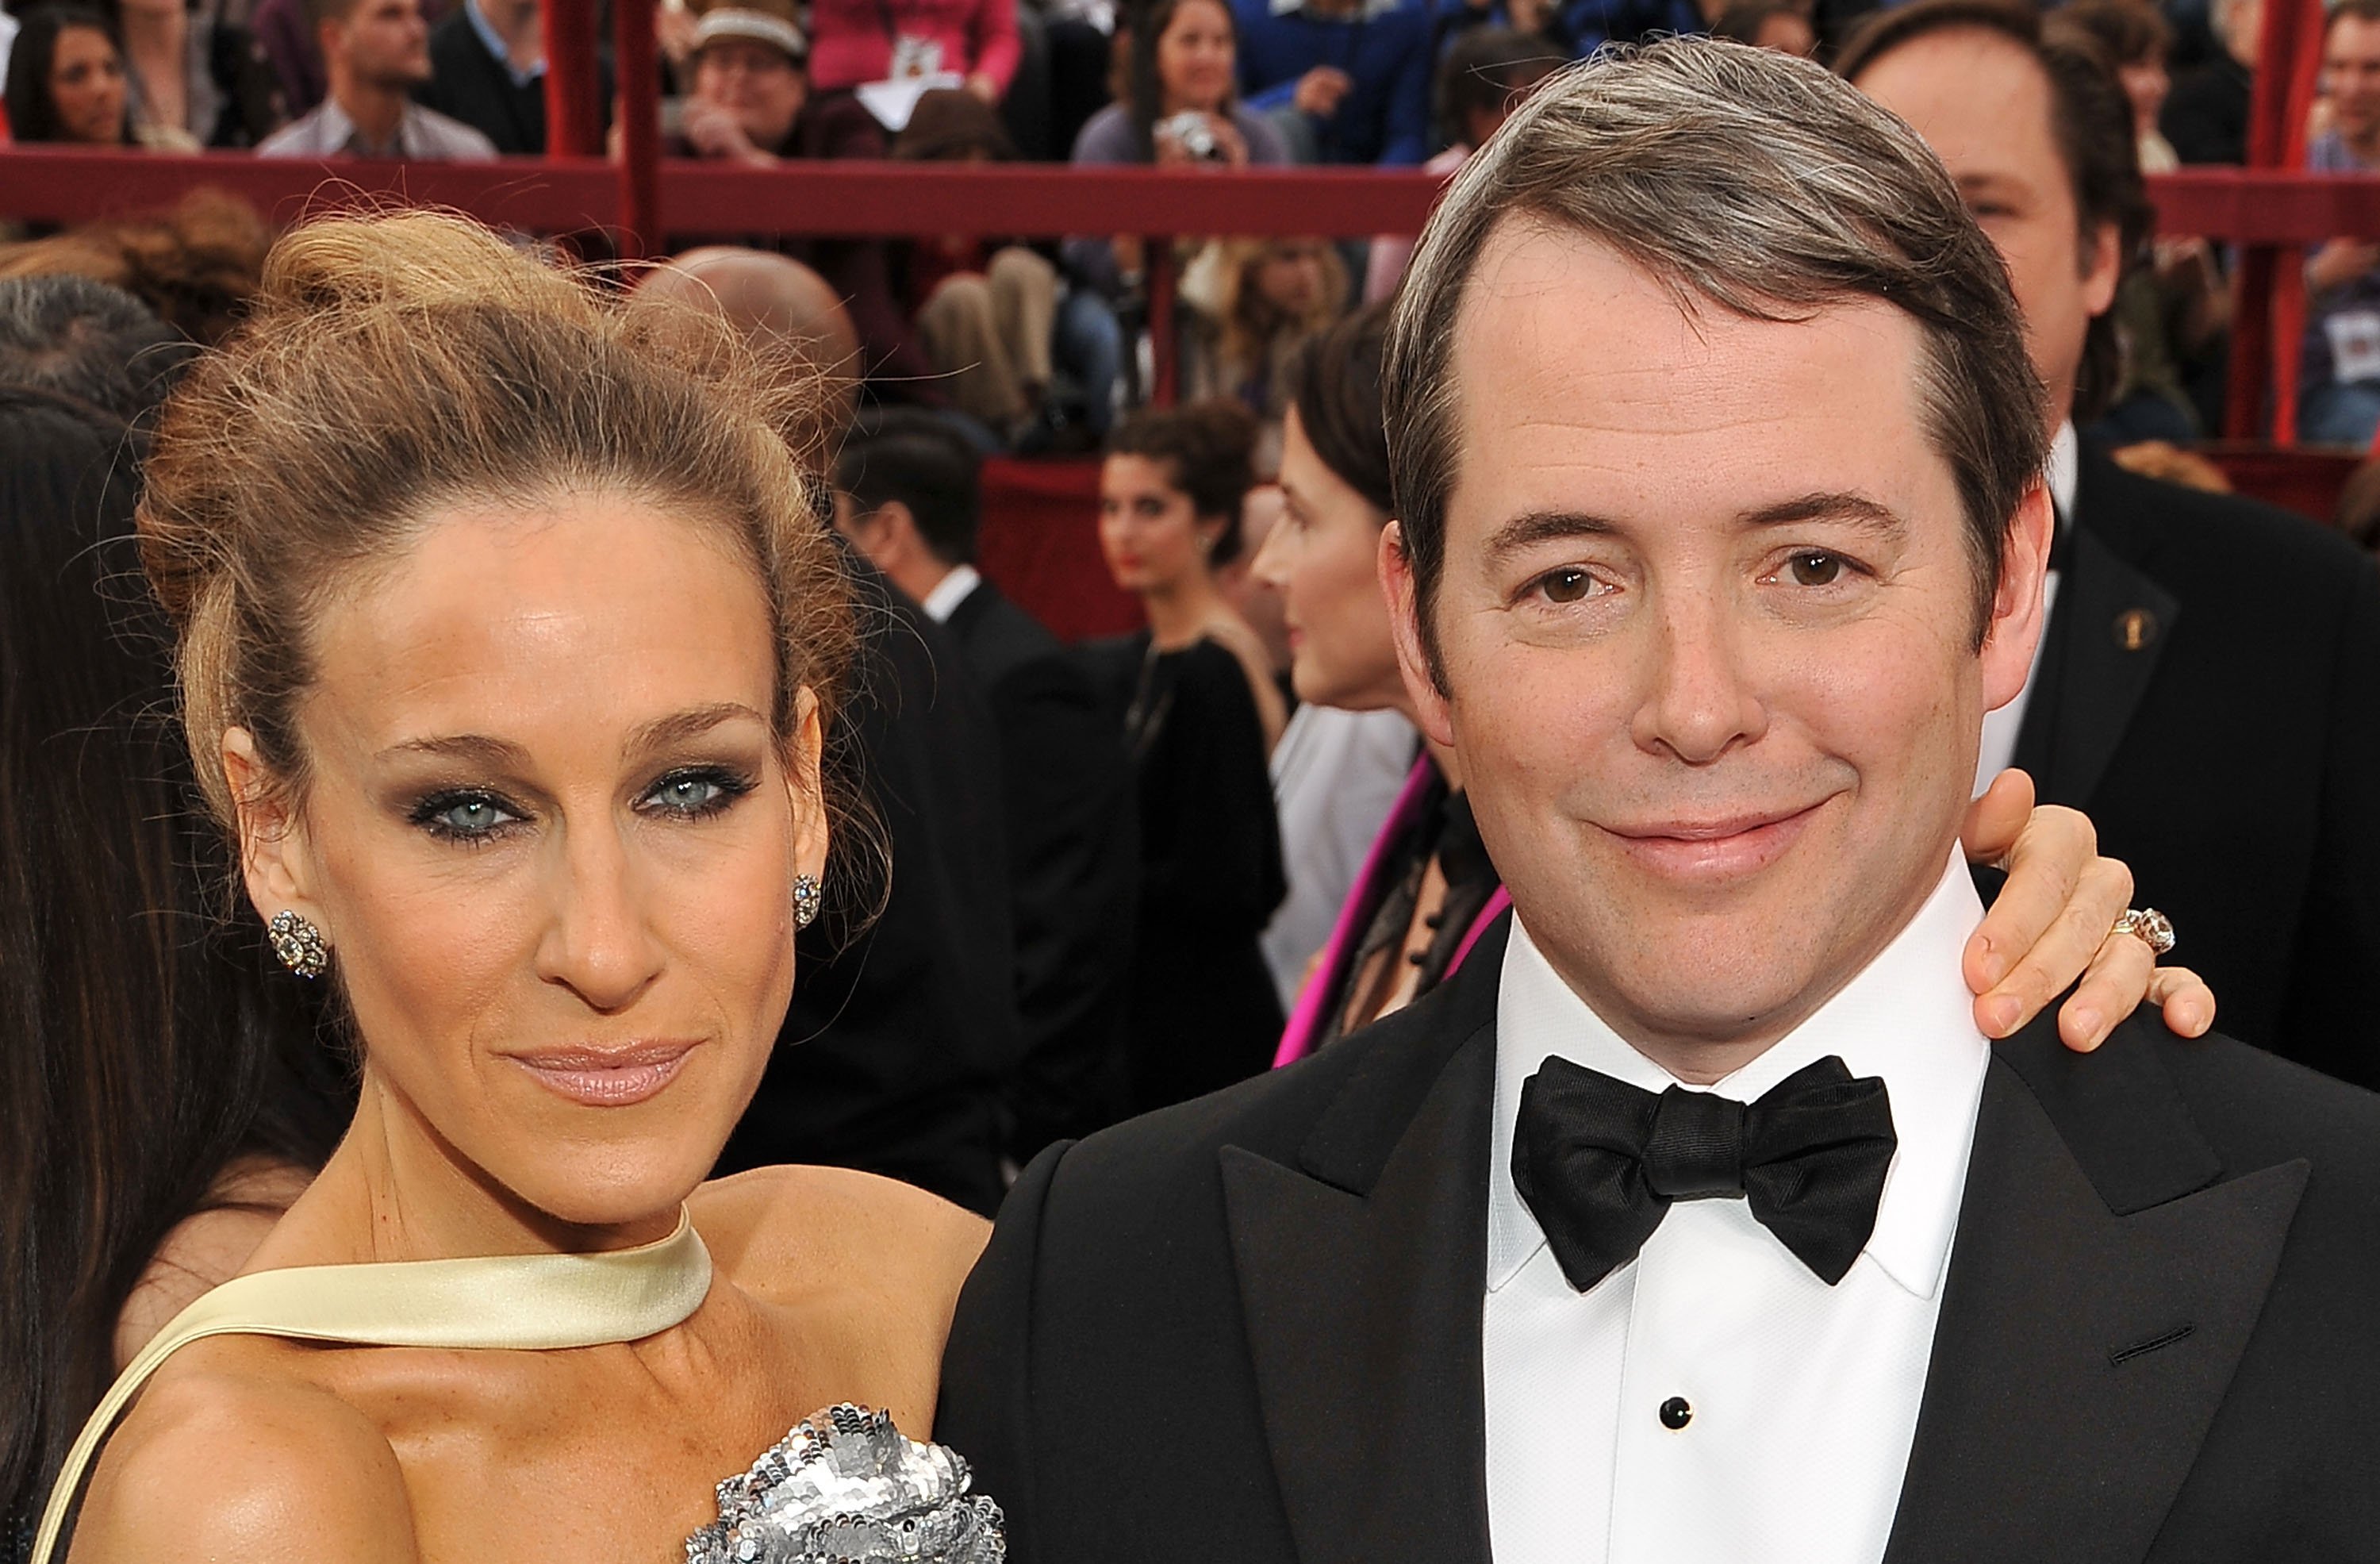 Sarah Jessica Parker and Matthew Broderick at the 82nd Annual Academy Awards on March 7, 2010 | Source: Getty Images